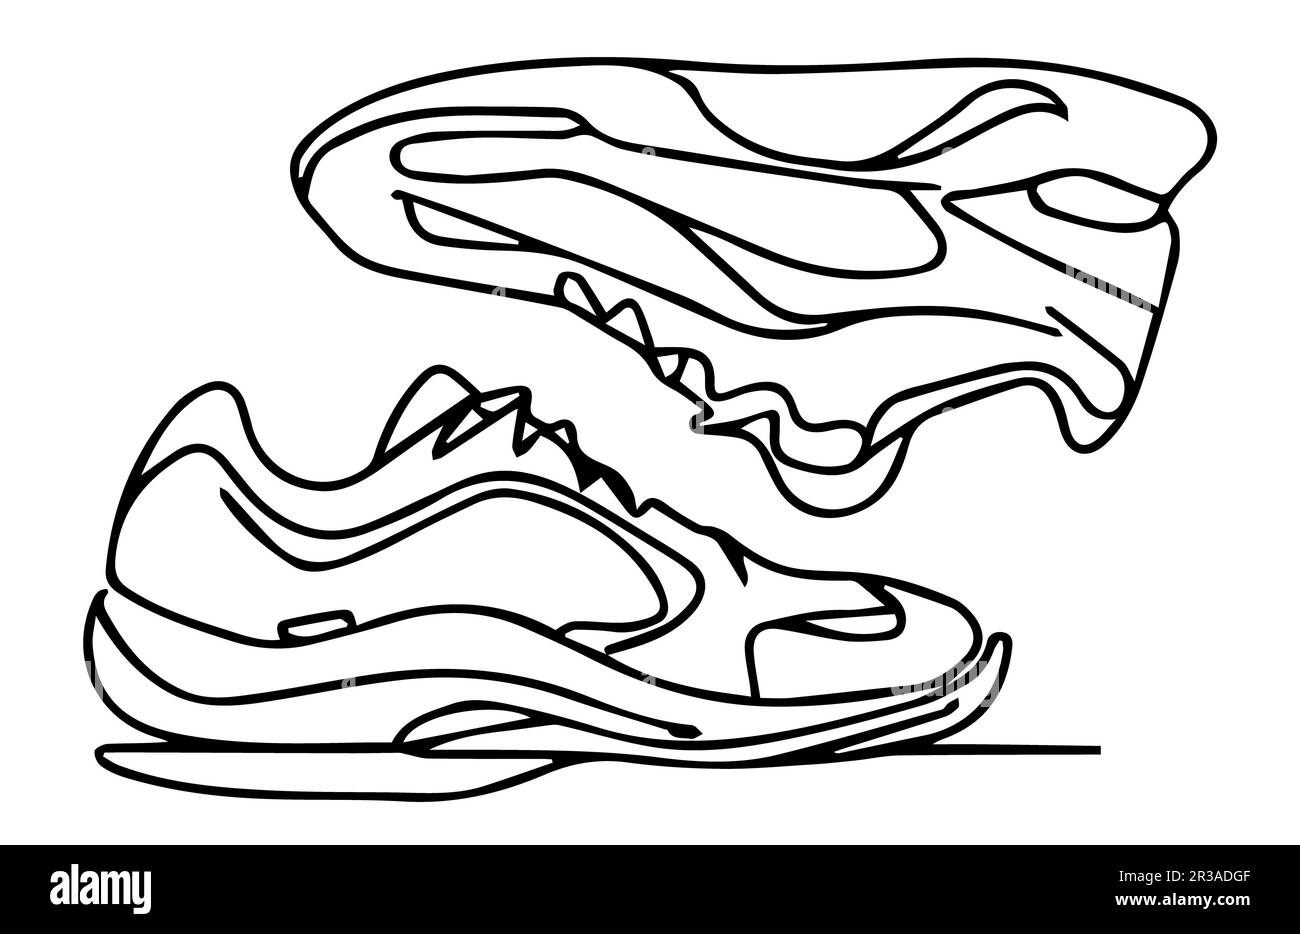 A pair of sports shoes line art vector Stock Photo